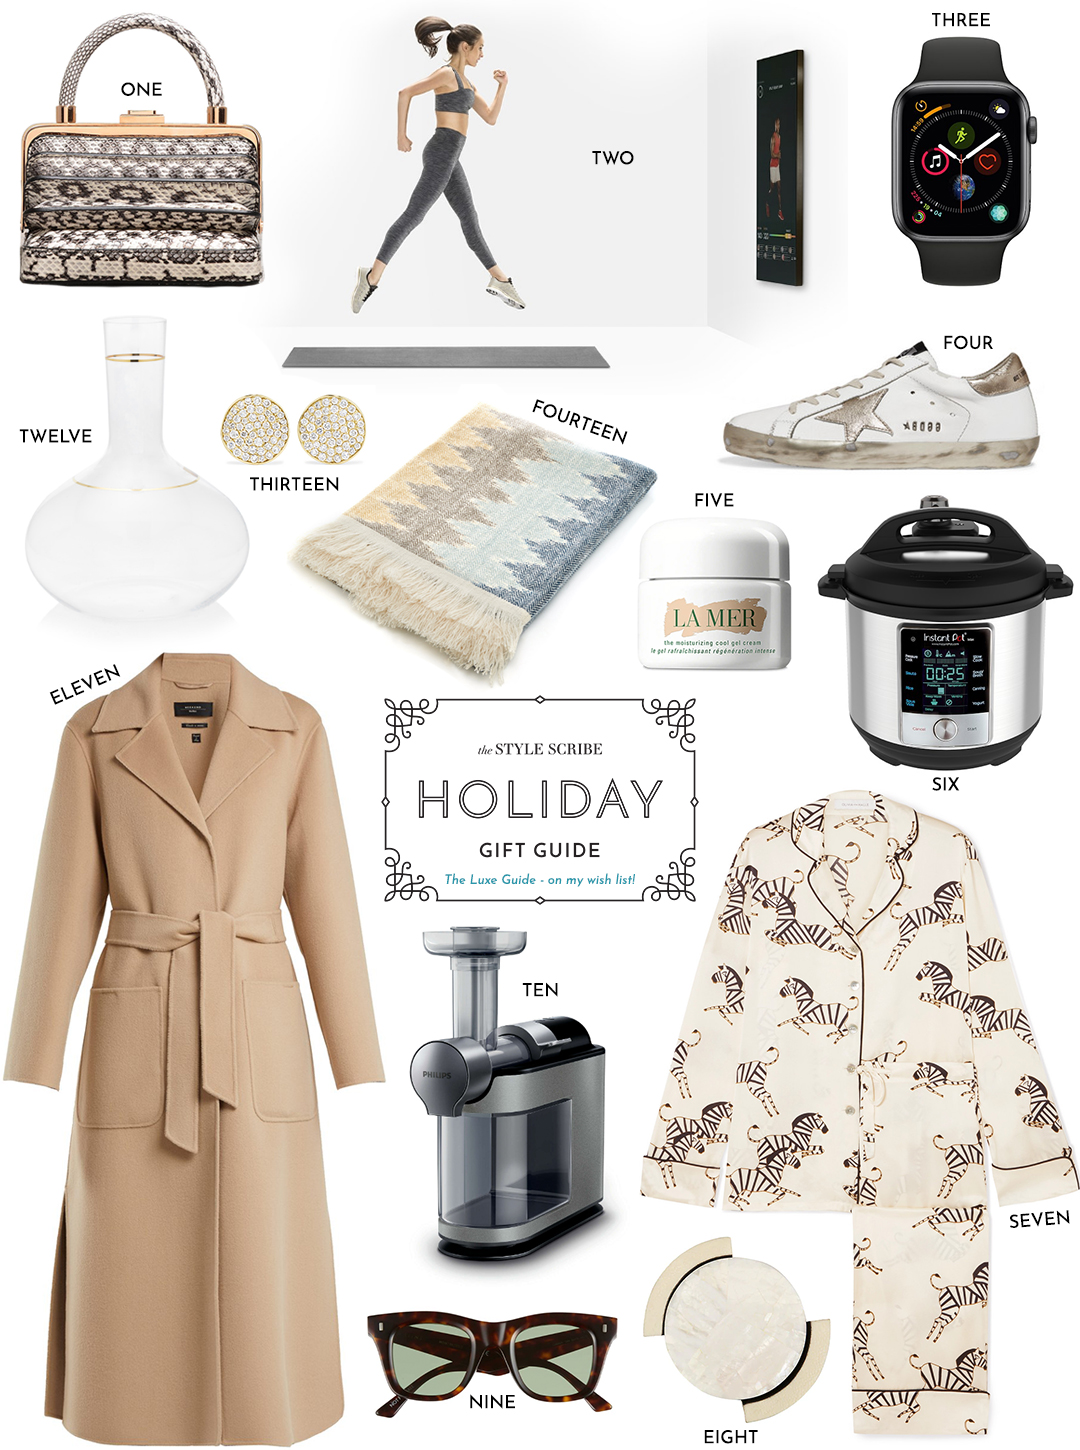 HOLIDAY GIFT GUIDE // THE LUXE GUIDE - ON MY WISH LIST